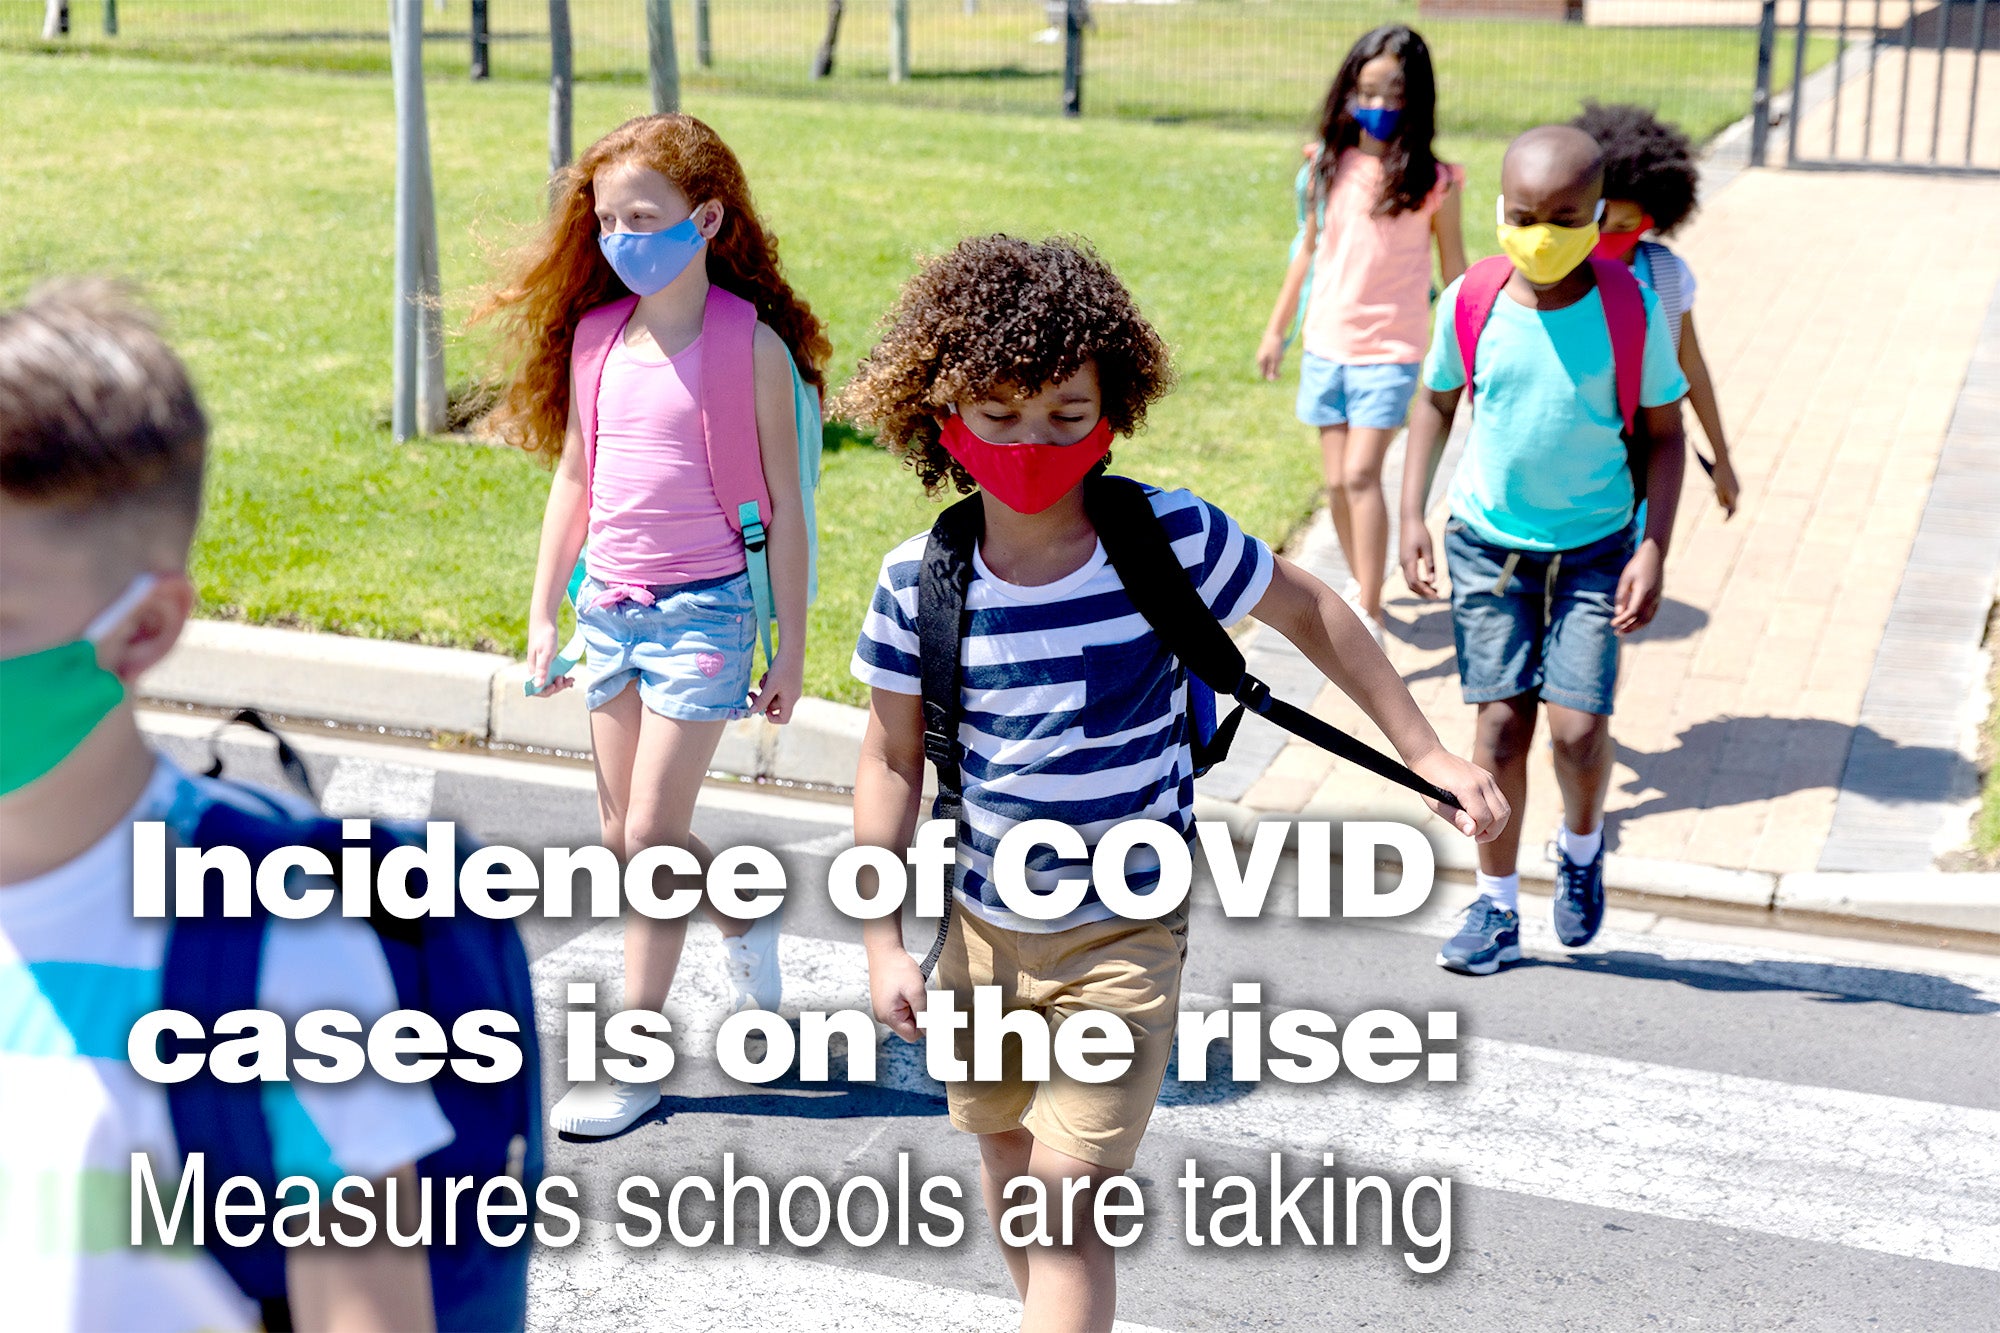 The incidence of COVID cases is on the rise, prompting questions about the measures schools are taking.